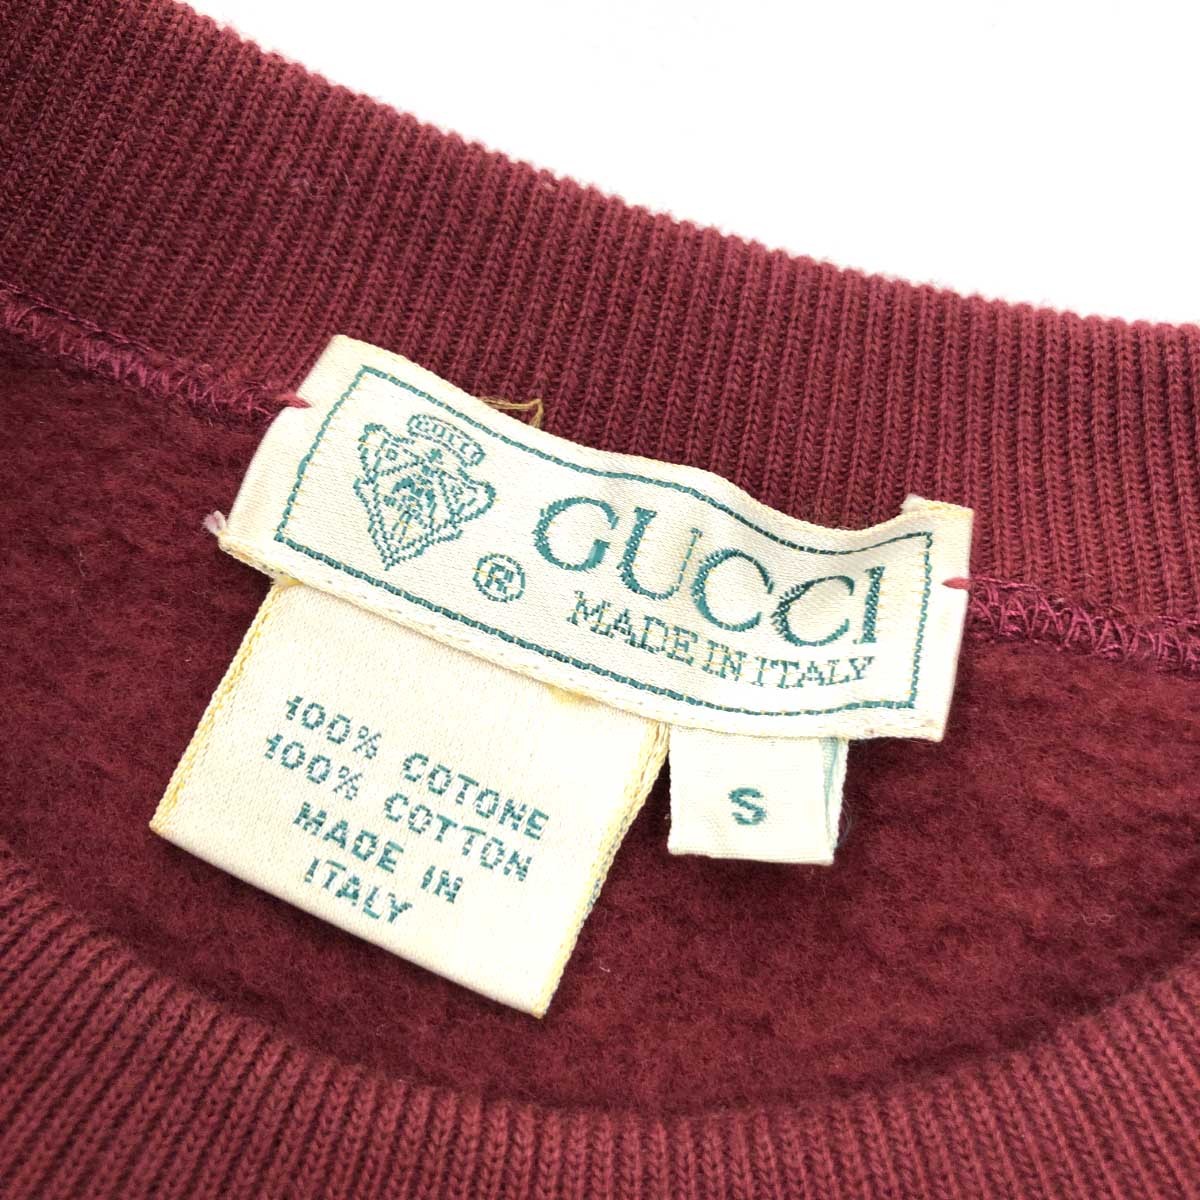 *GUCCI Gucci sweat One-piece size S* bordeaux cotton lady's tops long sleeve reverse side nappy embroidery 